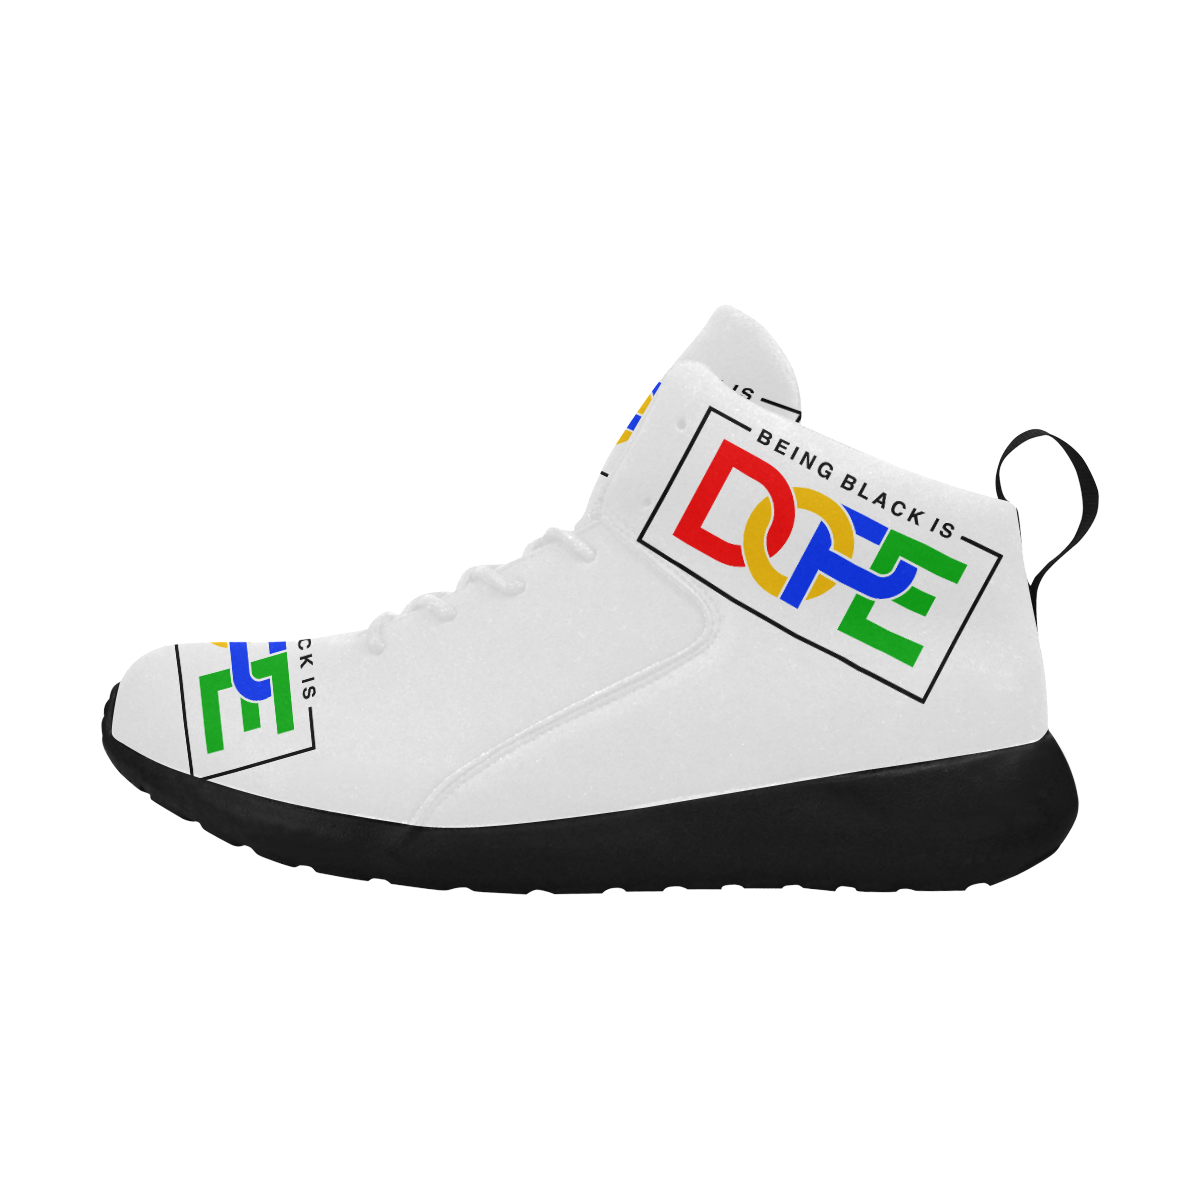 BEING BLACK IS DOPE Women's Chukka Training Shoes (Model 57502)